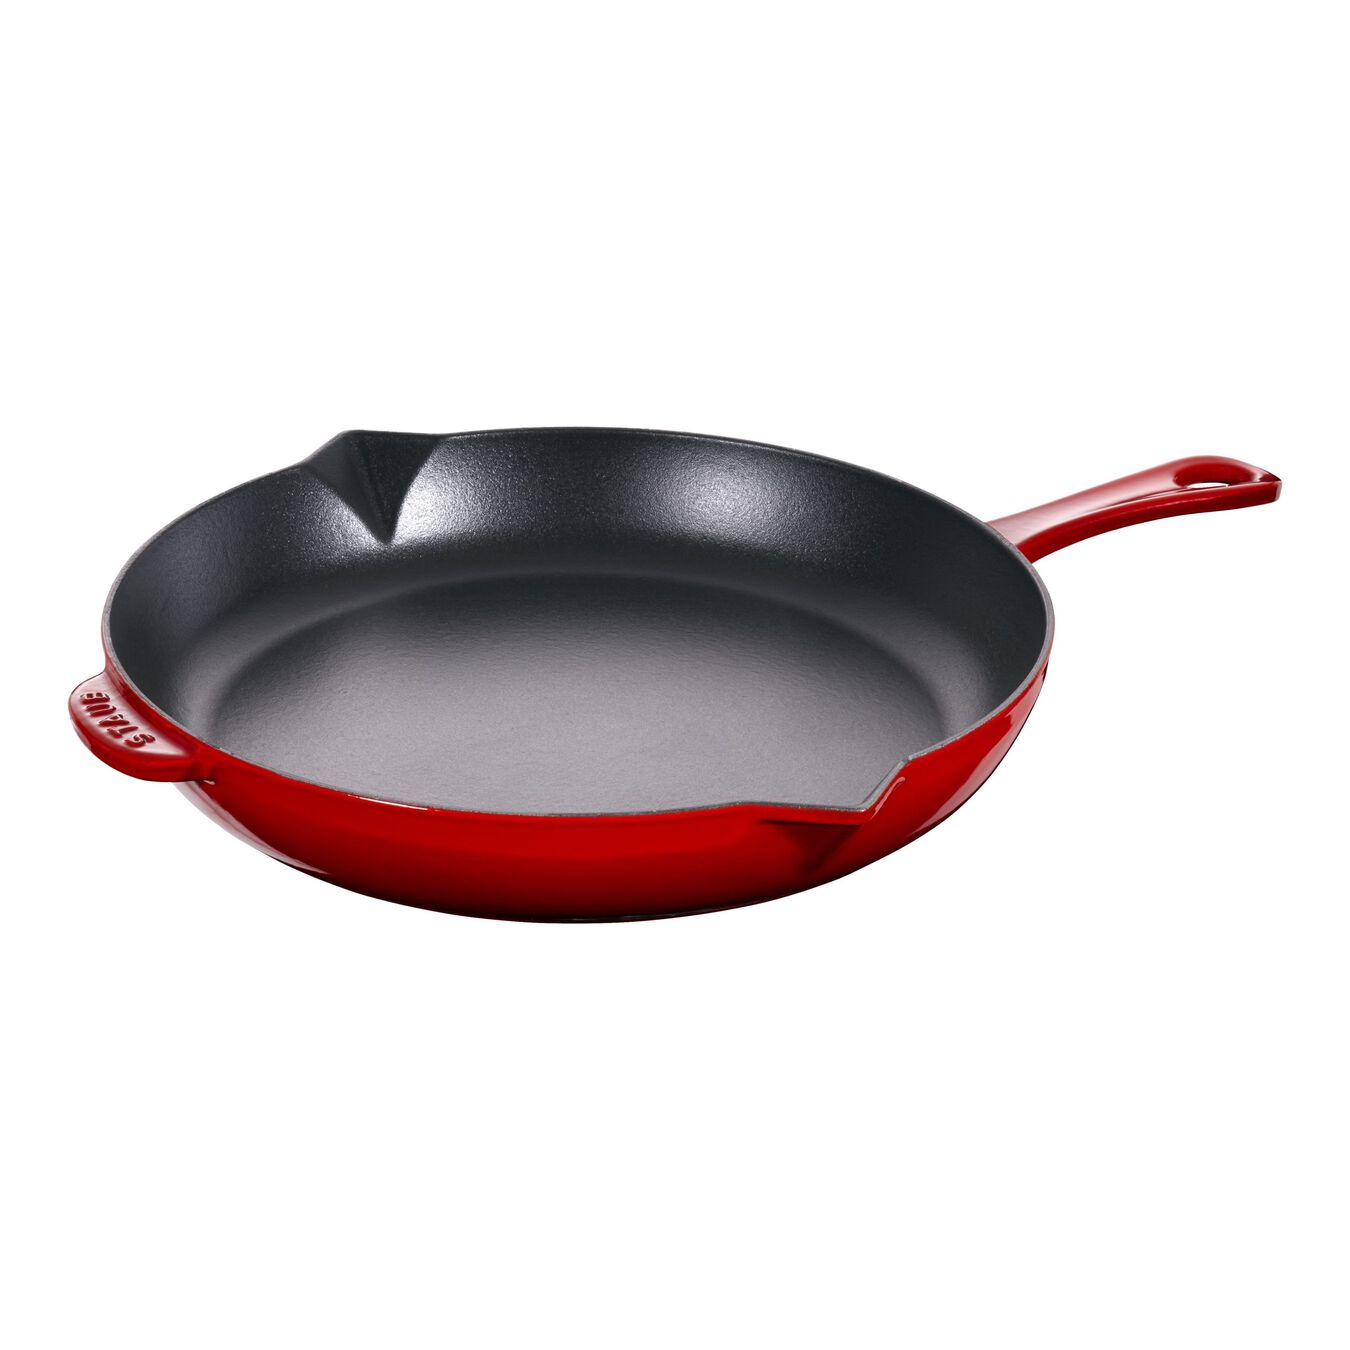 26 cm / 10 inch cast iron Frying pan with pouring spout, cherry,,large 1